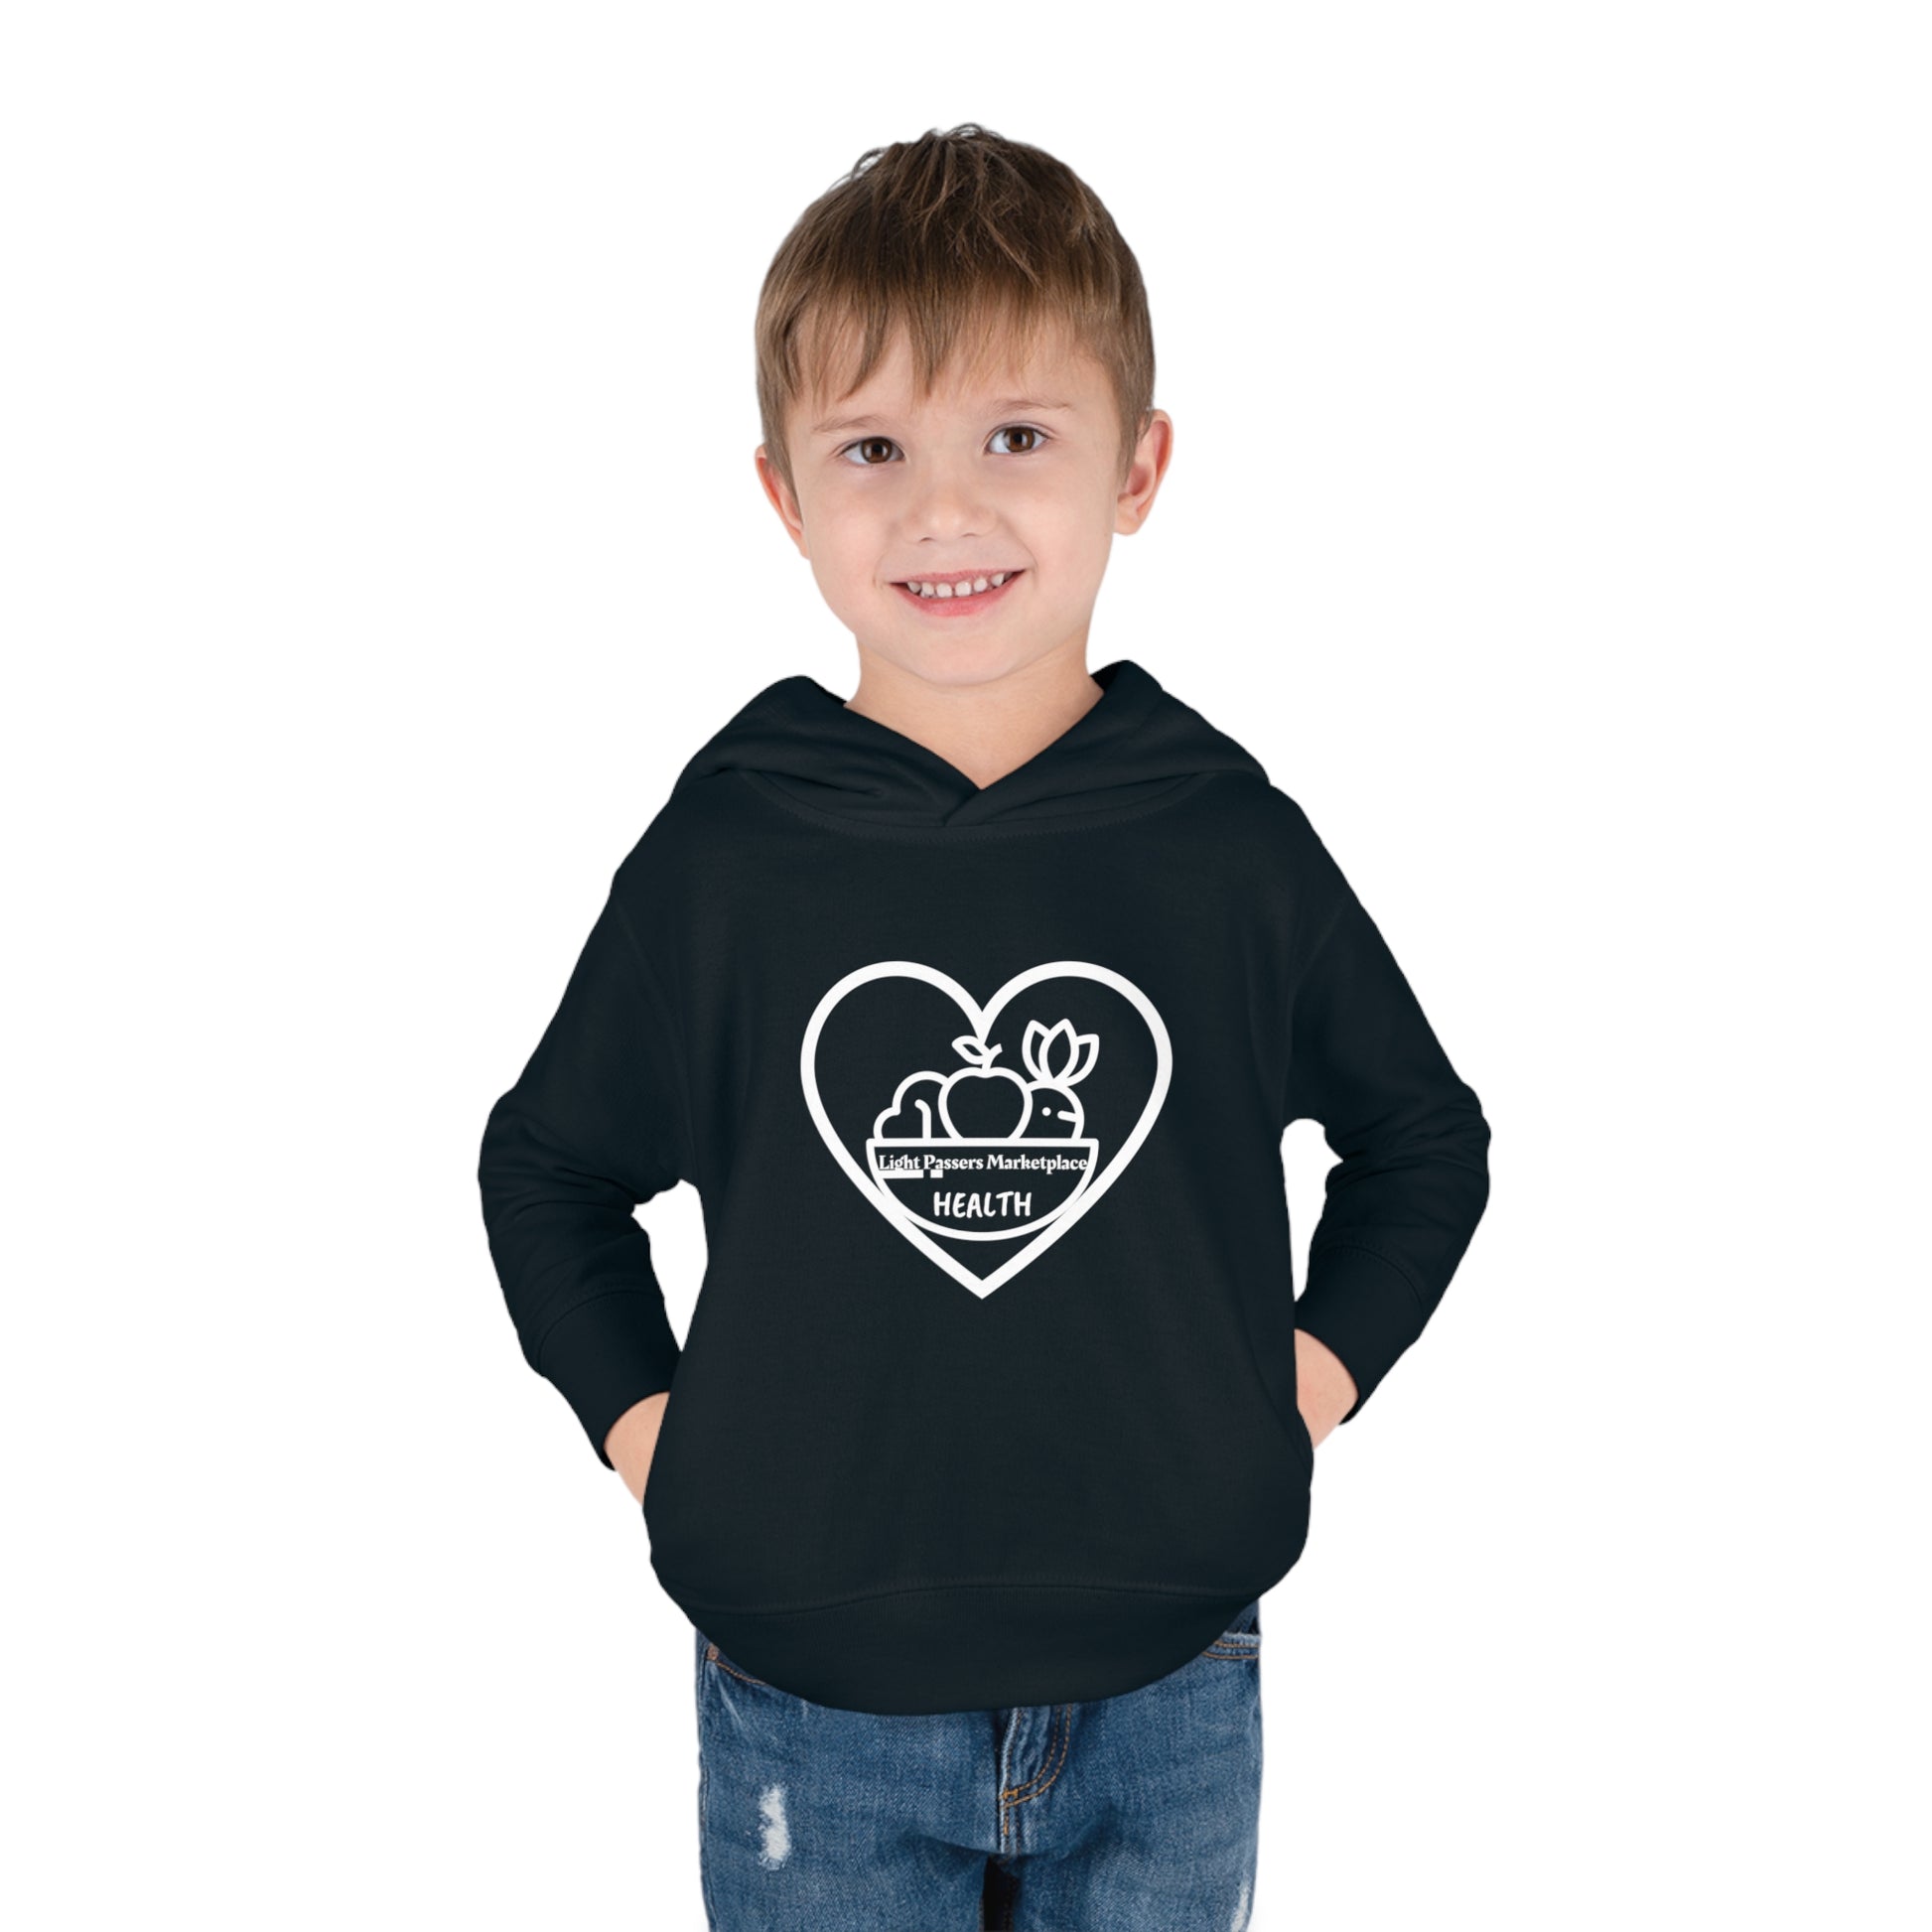 A toddler in a black hoodie with a heart and fruit logo, featuring side seam pockets and cover-stitched details for durability and comfort.